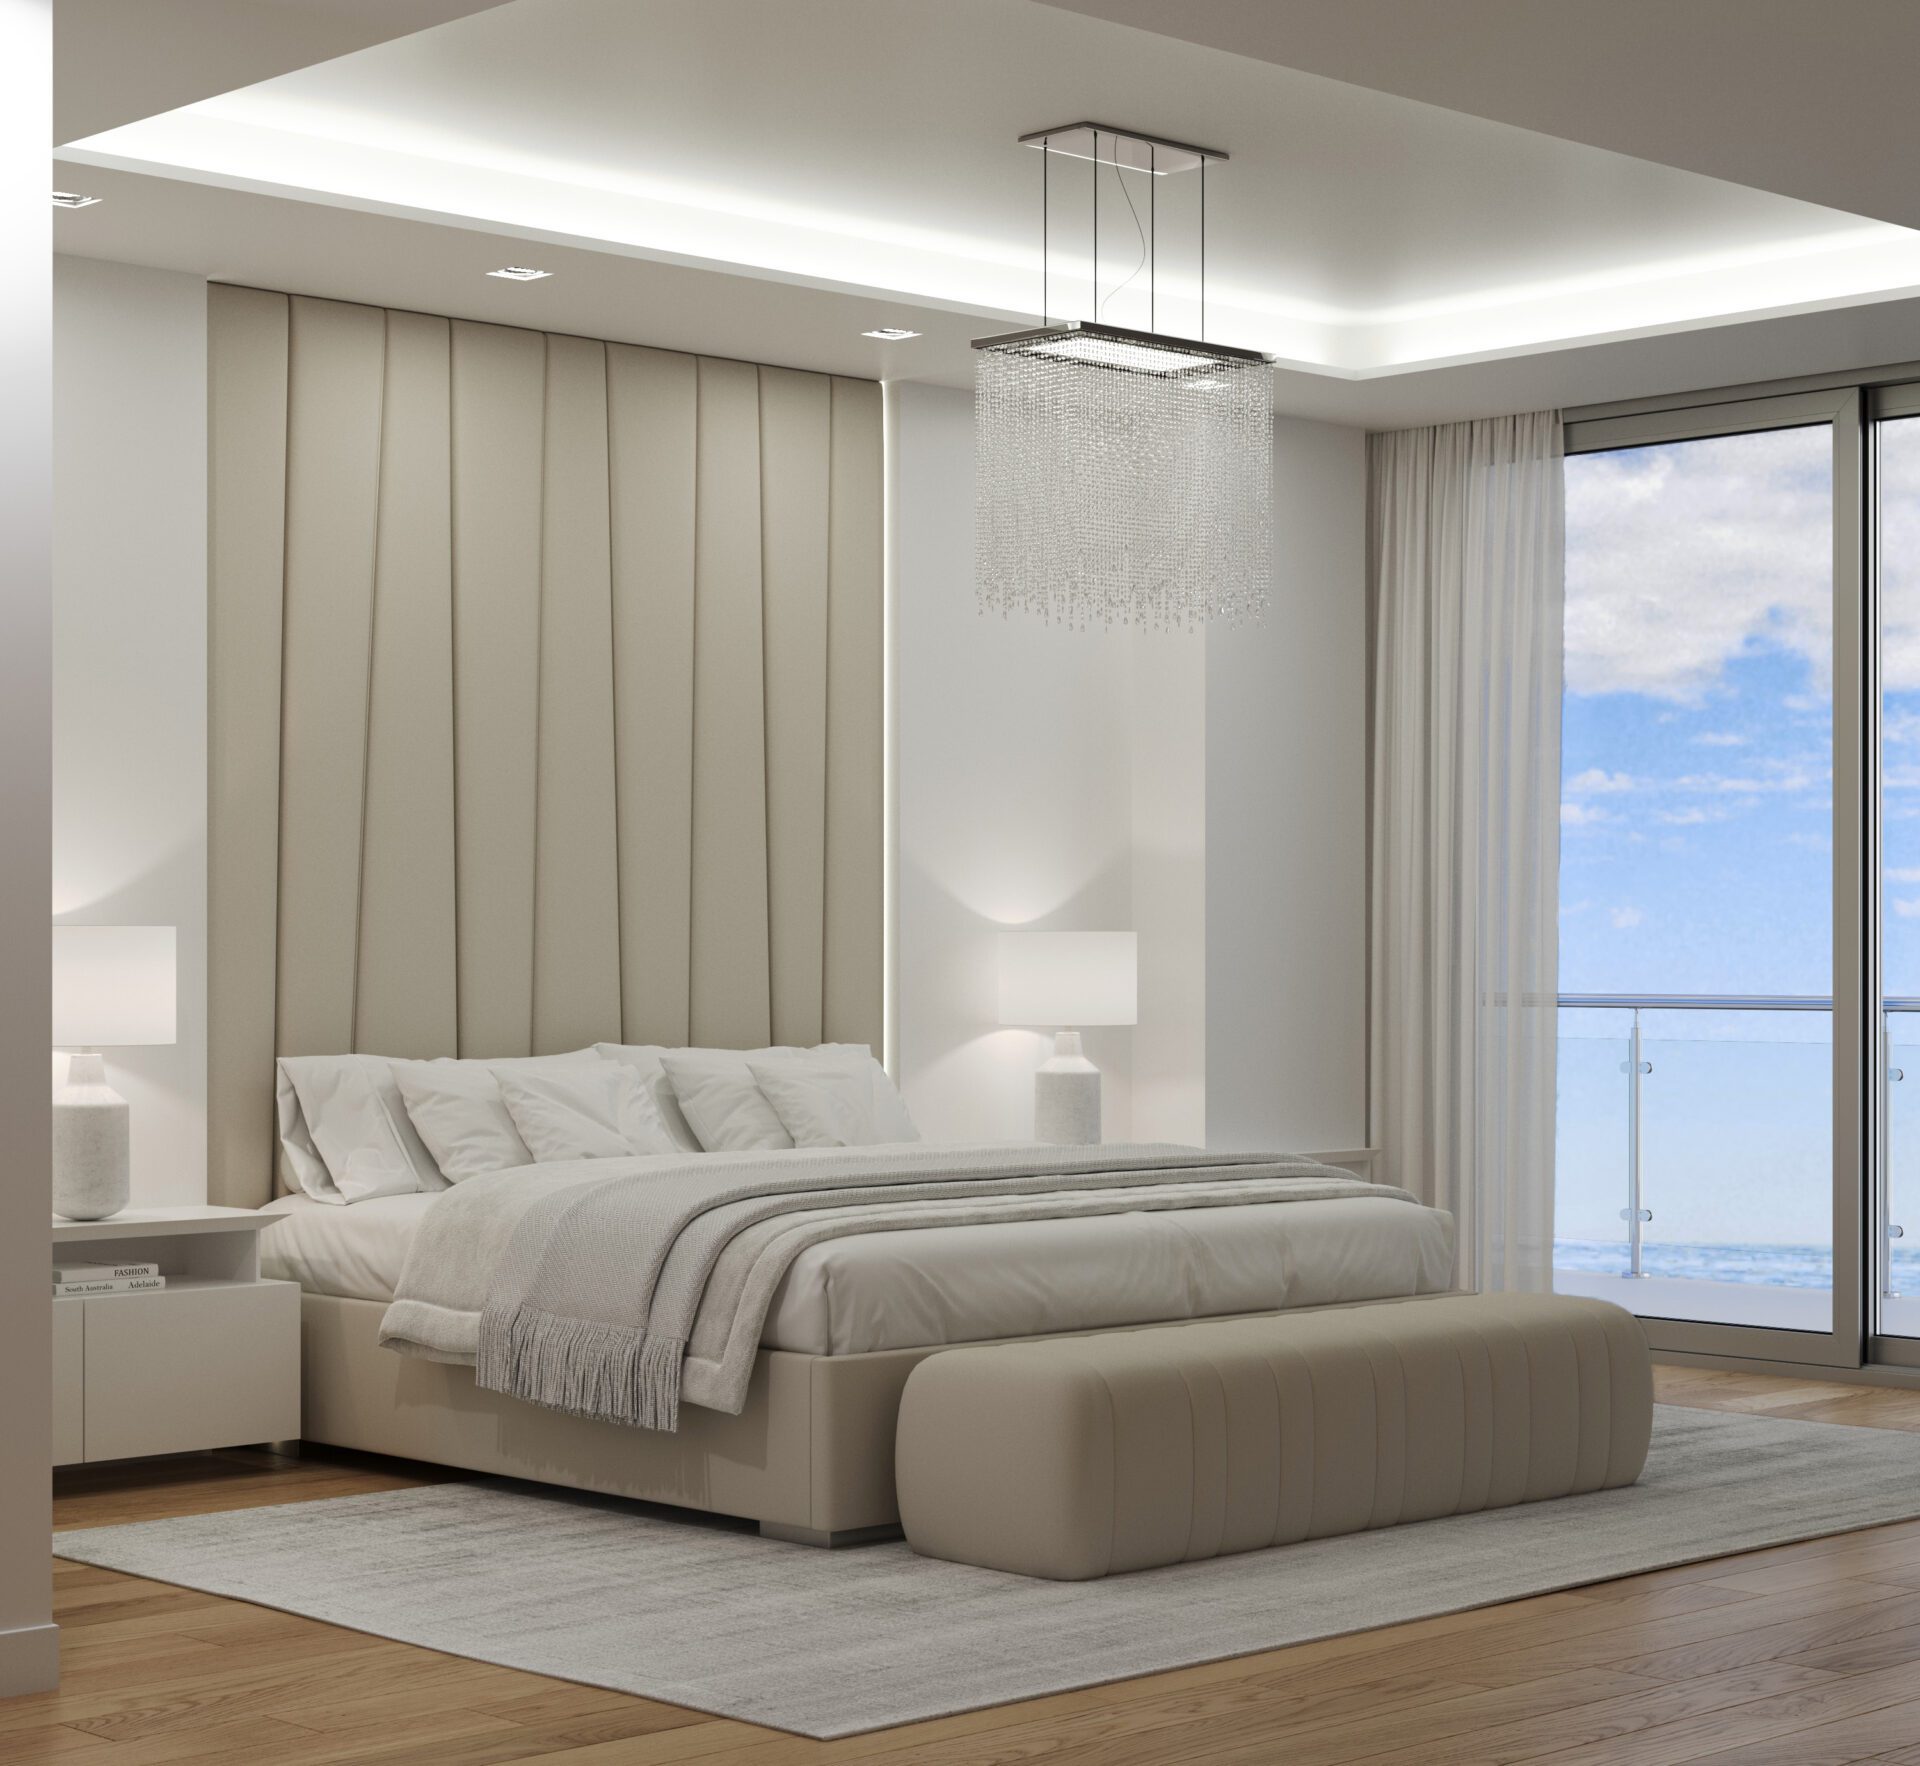 MILIEU | Upholstered Wall Mounted Headboard & Bed, Luxury Furniture - Blend Home Furnishings